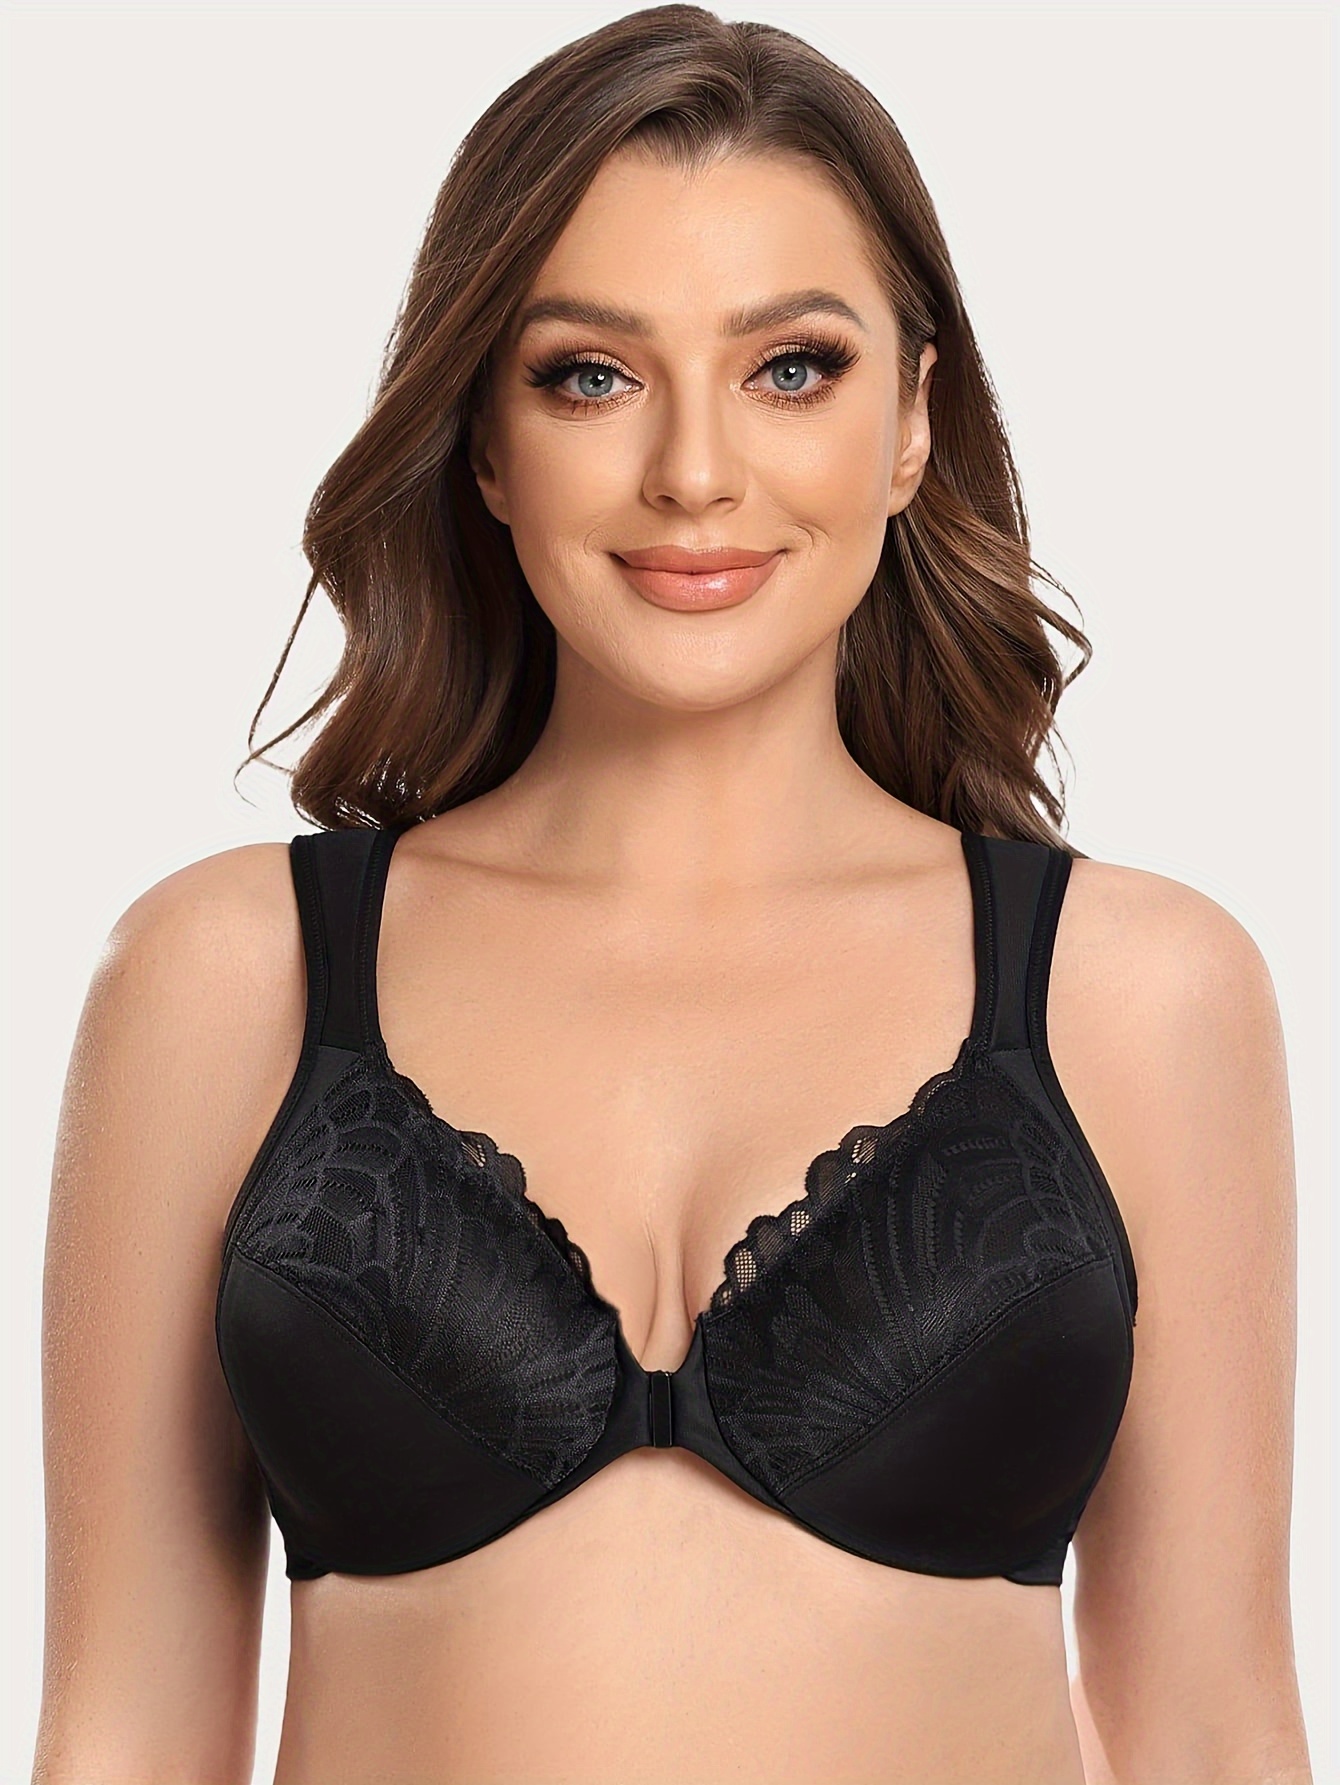 Shop Push Up Bra Free Size 40b with great discounts and prices